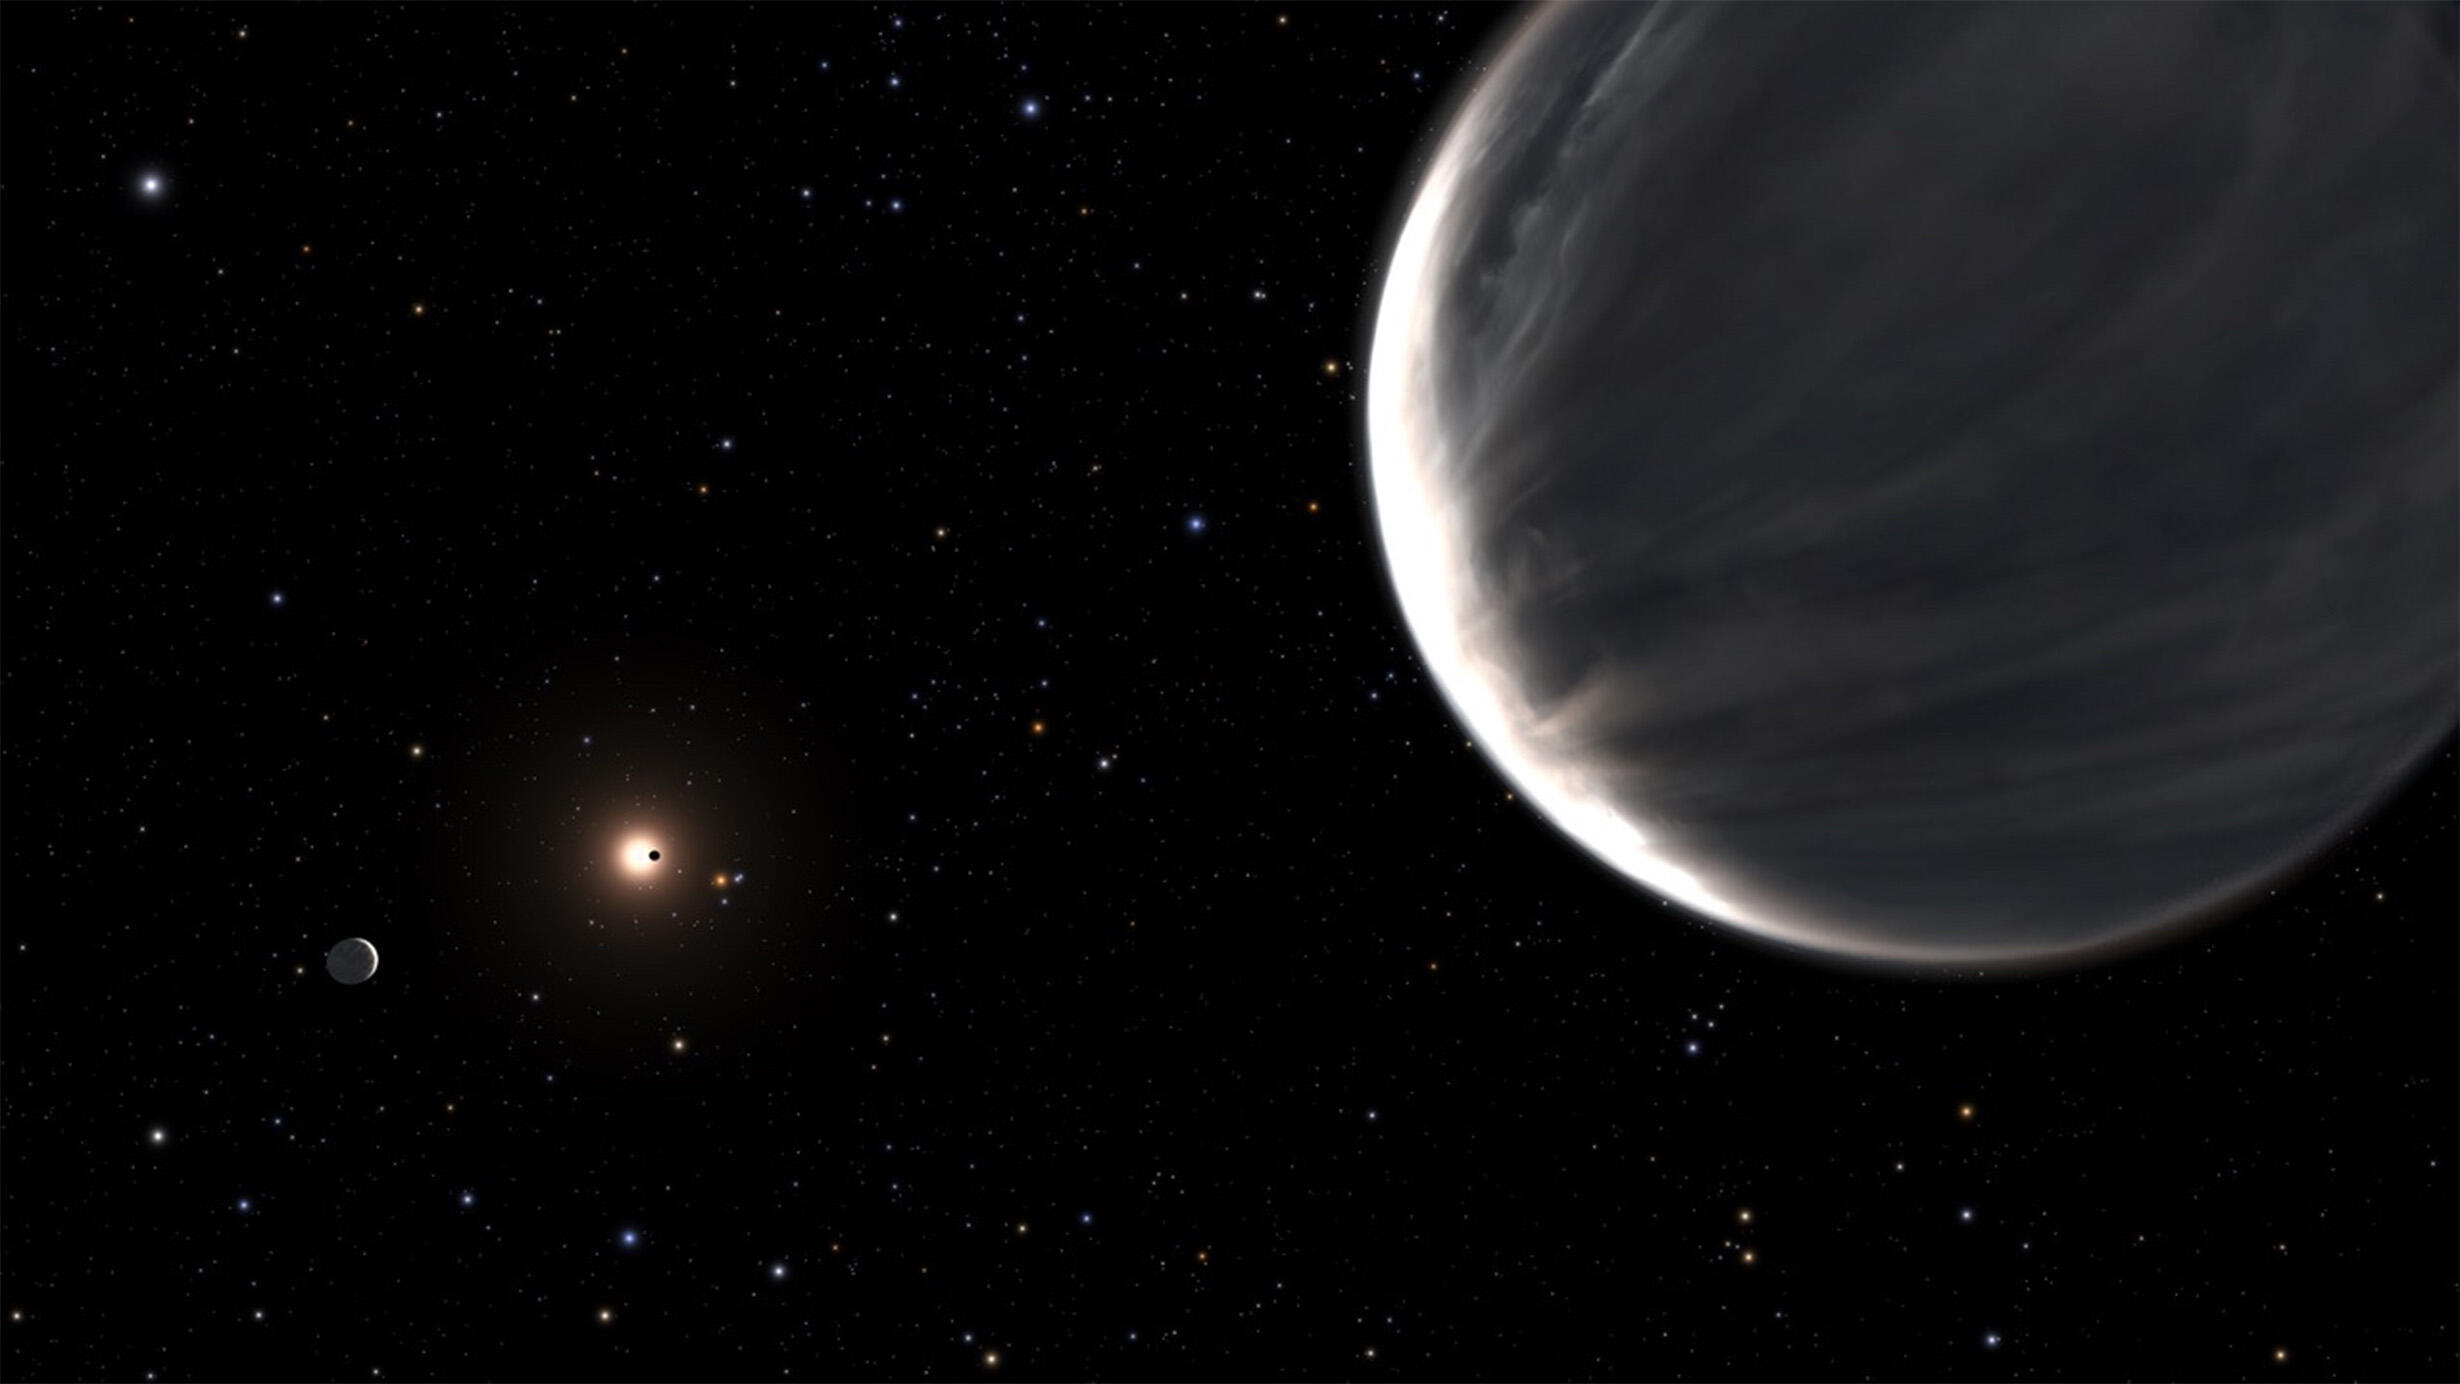 Large planet in right foreground, a small planet in left foreground and even smaller planet in left background passing in front of a bright star.